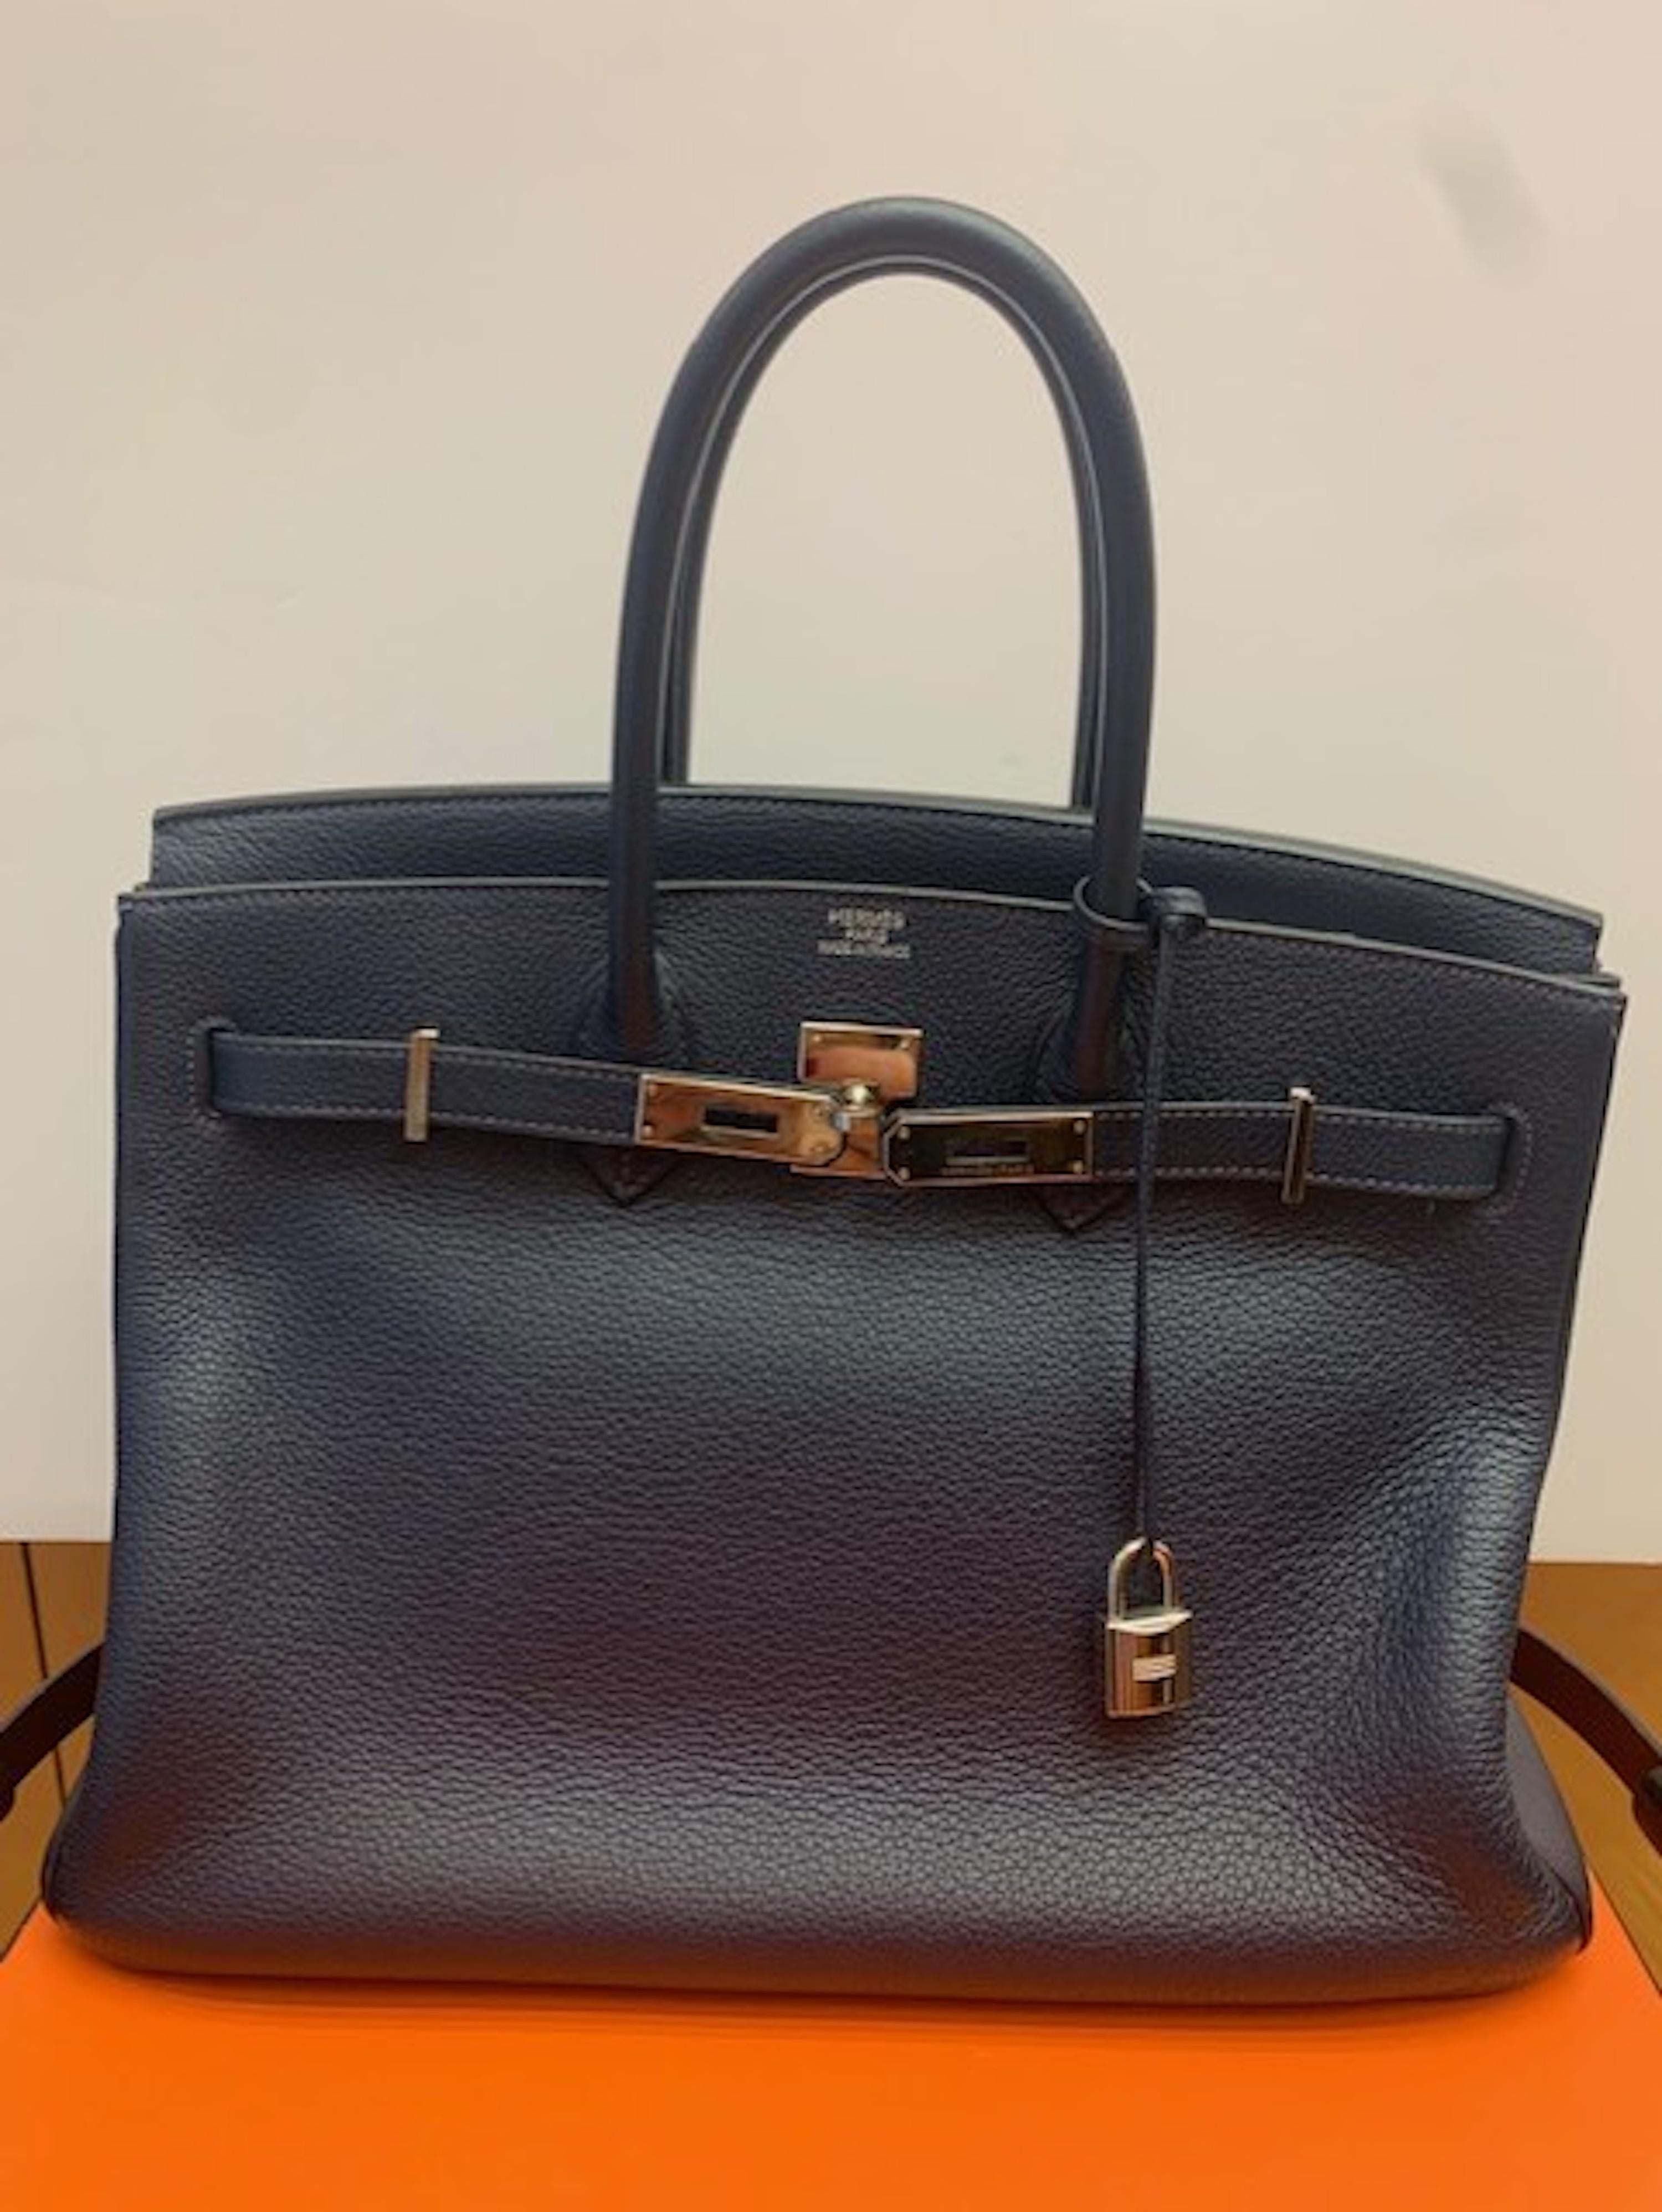 Birkin 35 in “Blue Nuit” “Tourillon Clemence” leather, a really very dark blue.
Its condition is excellent, a very light sign of use on one corner, see photos, but nothing major.
Internally lined with 